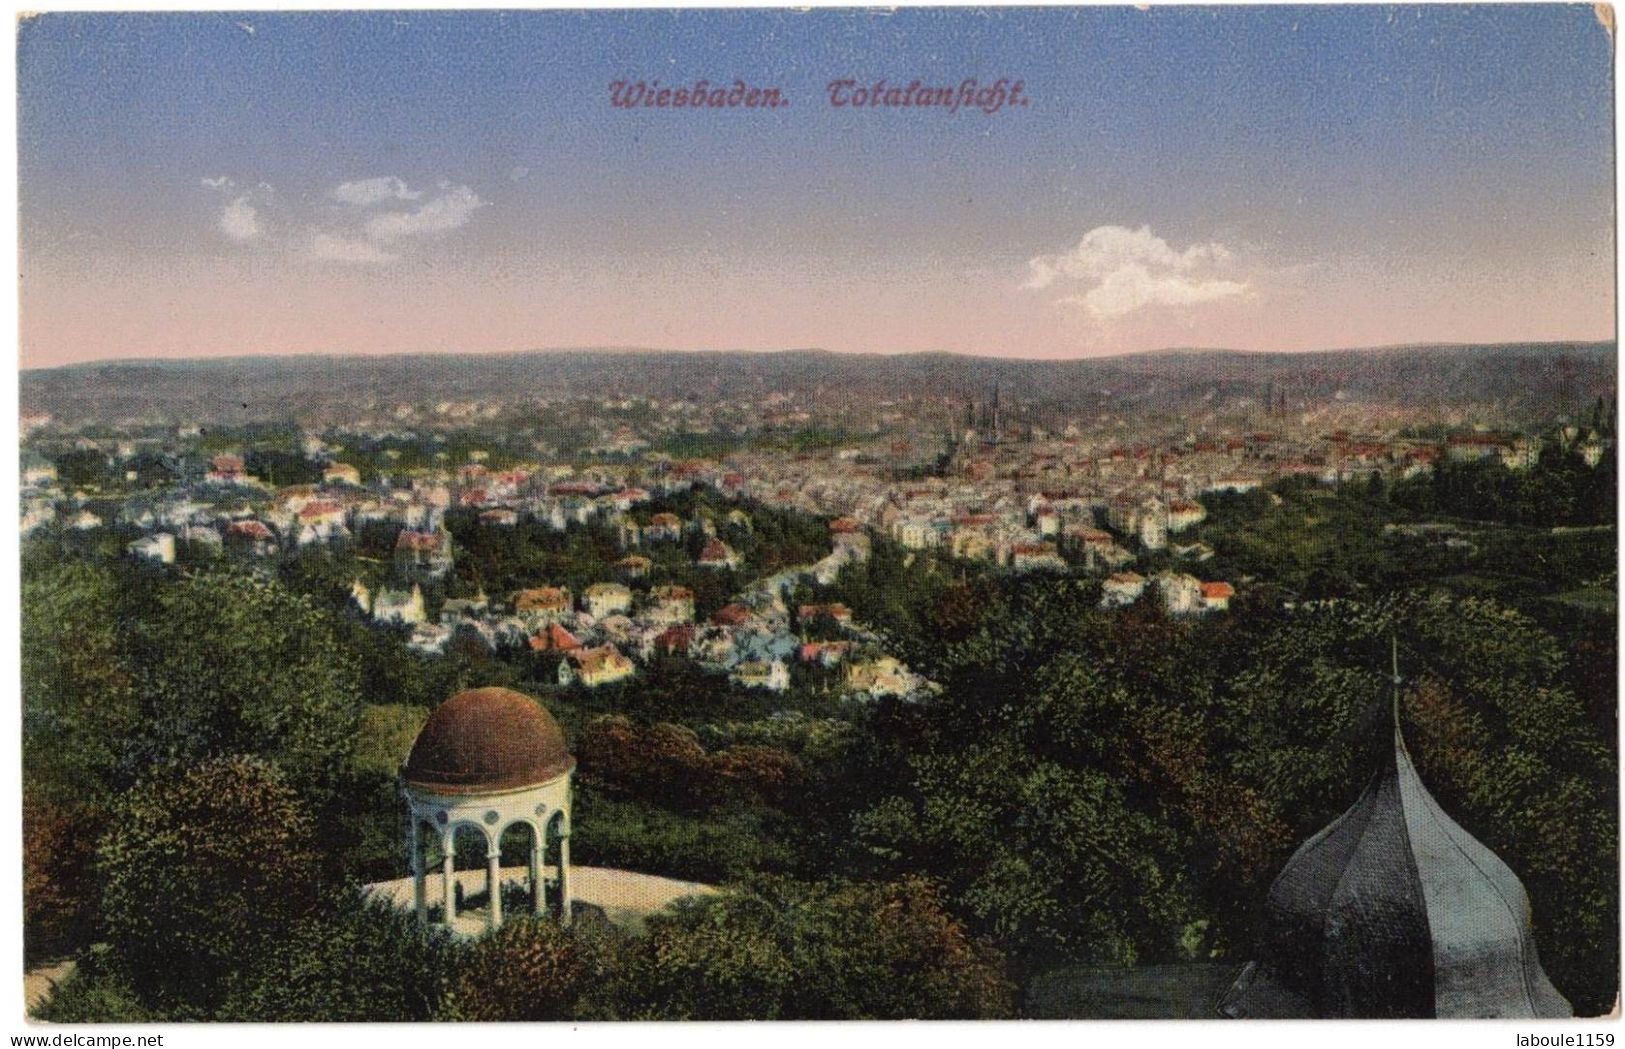 ALLEMAGNE GERMANY HESSE WIESBADEN : TOTALANSICHT - EDITION COLORISEE - Passenger Cars